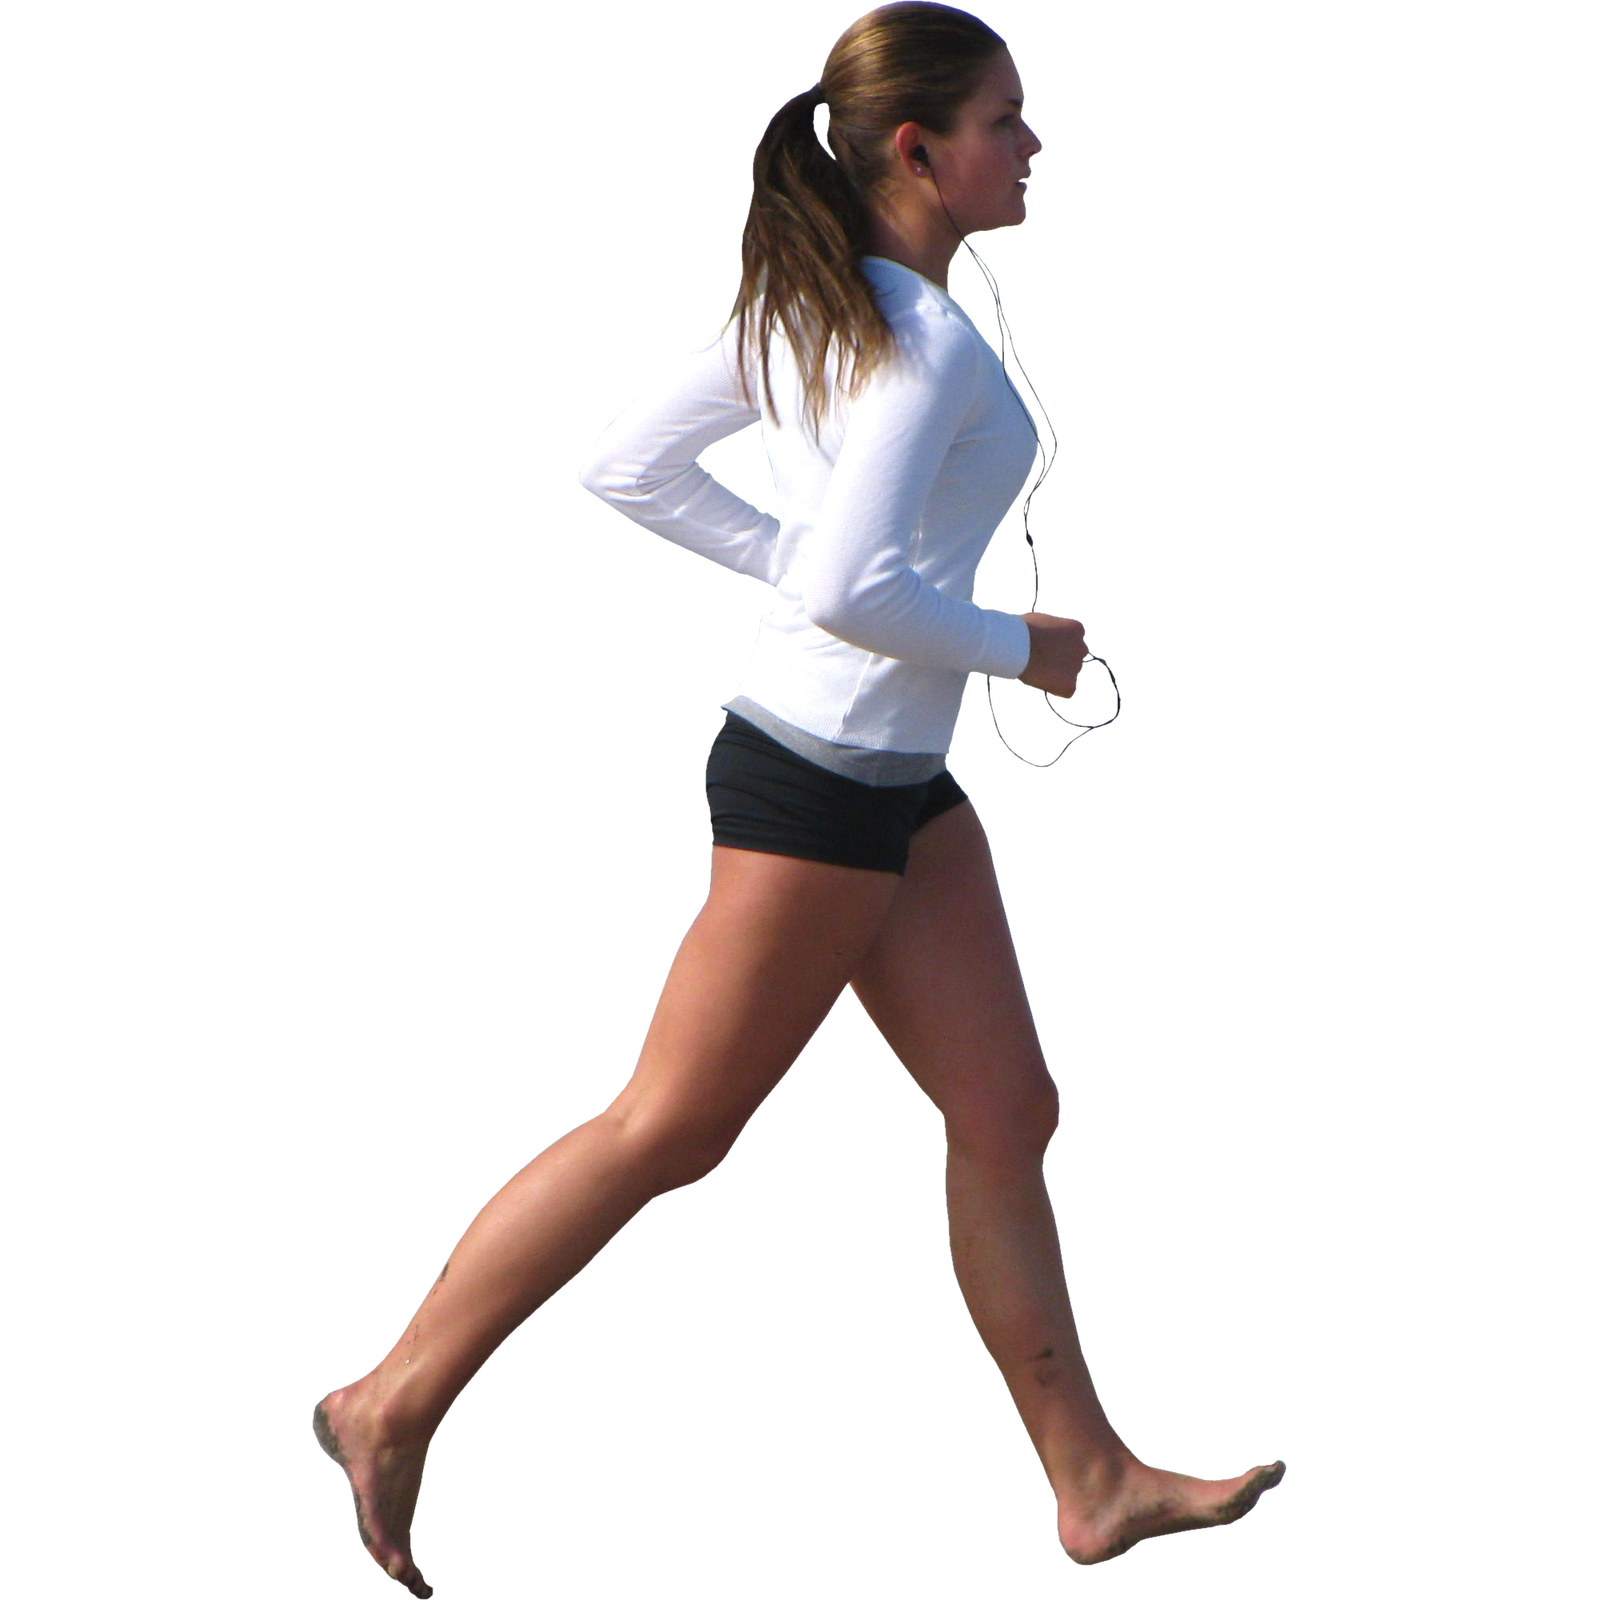 Woman Jogging Png - Running Woman Png Image, Transparent background PNG HD thumbnail